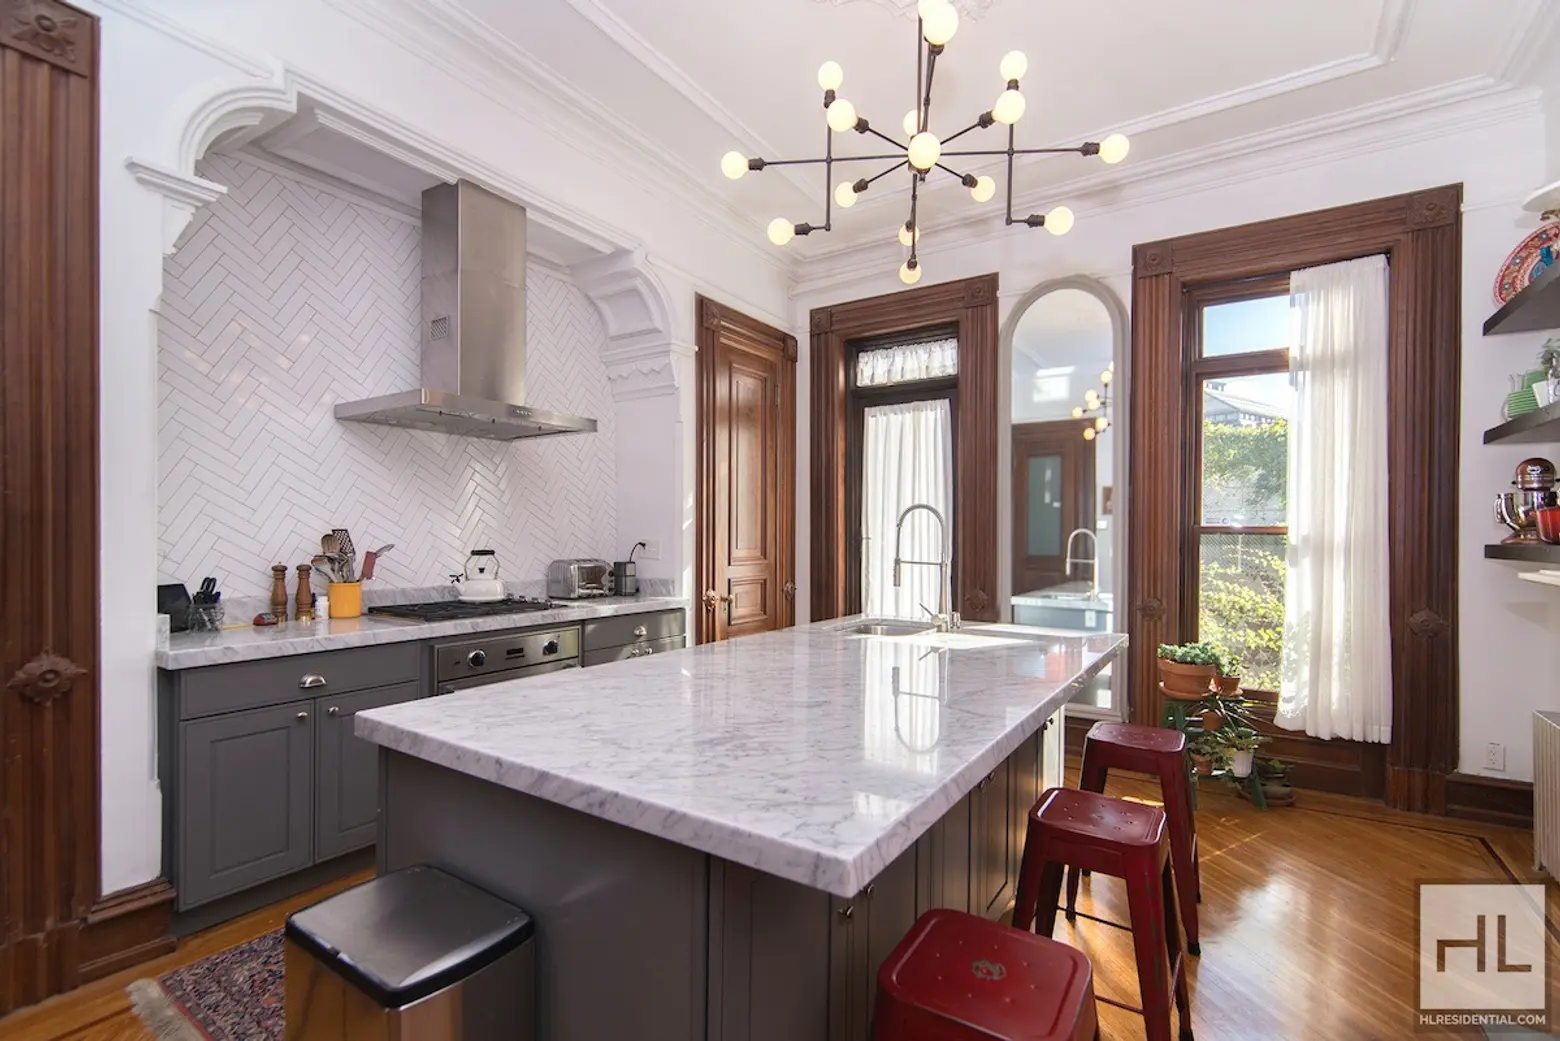 Rent a renovated Bed-Stuy triplex with a deck, yard and nanny suite for $6K/month